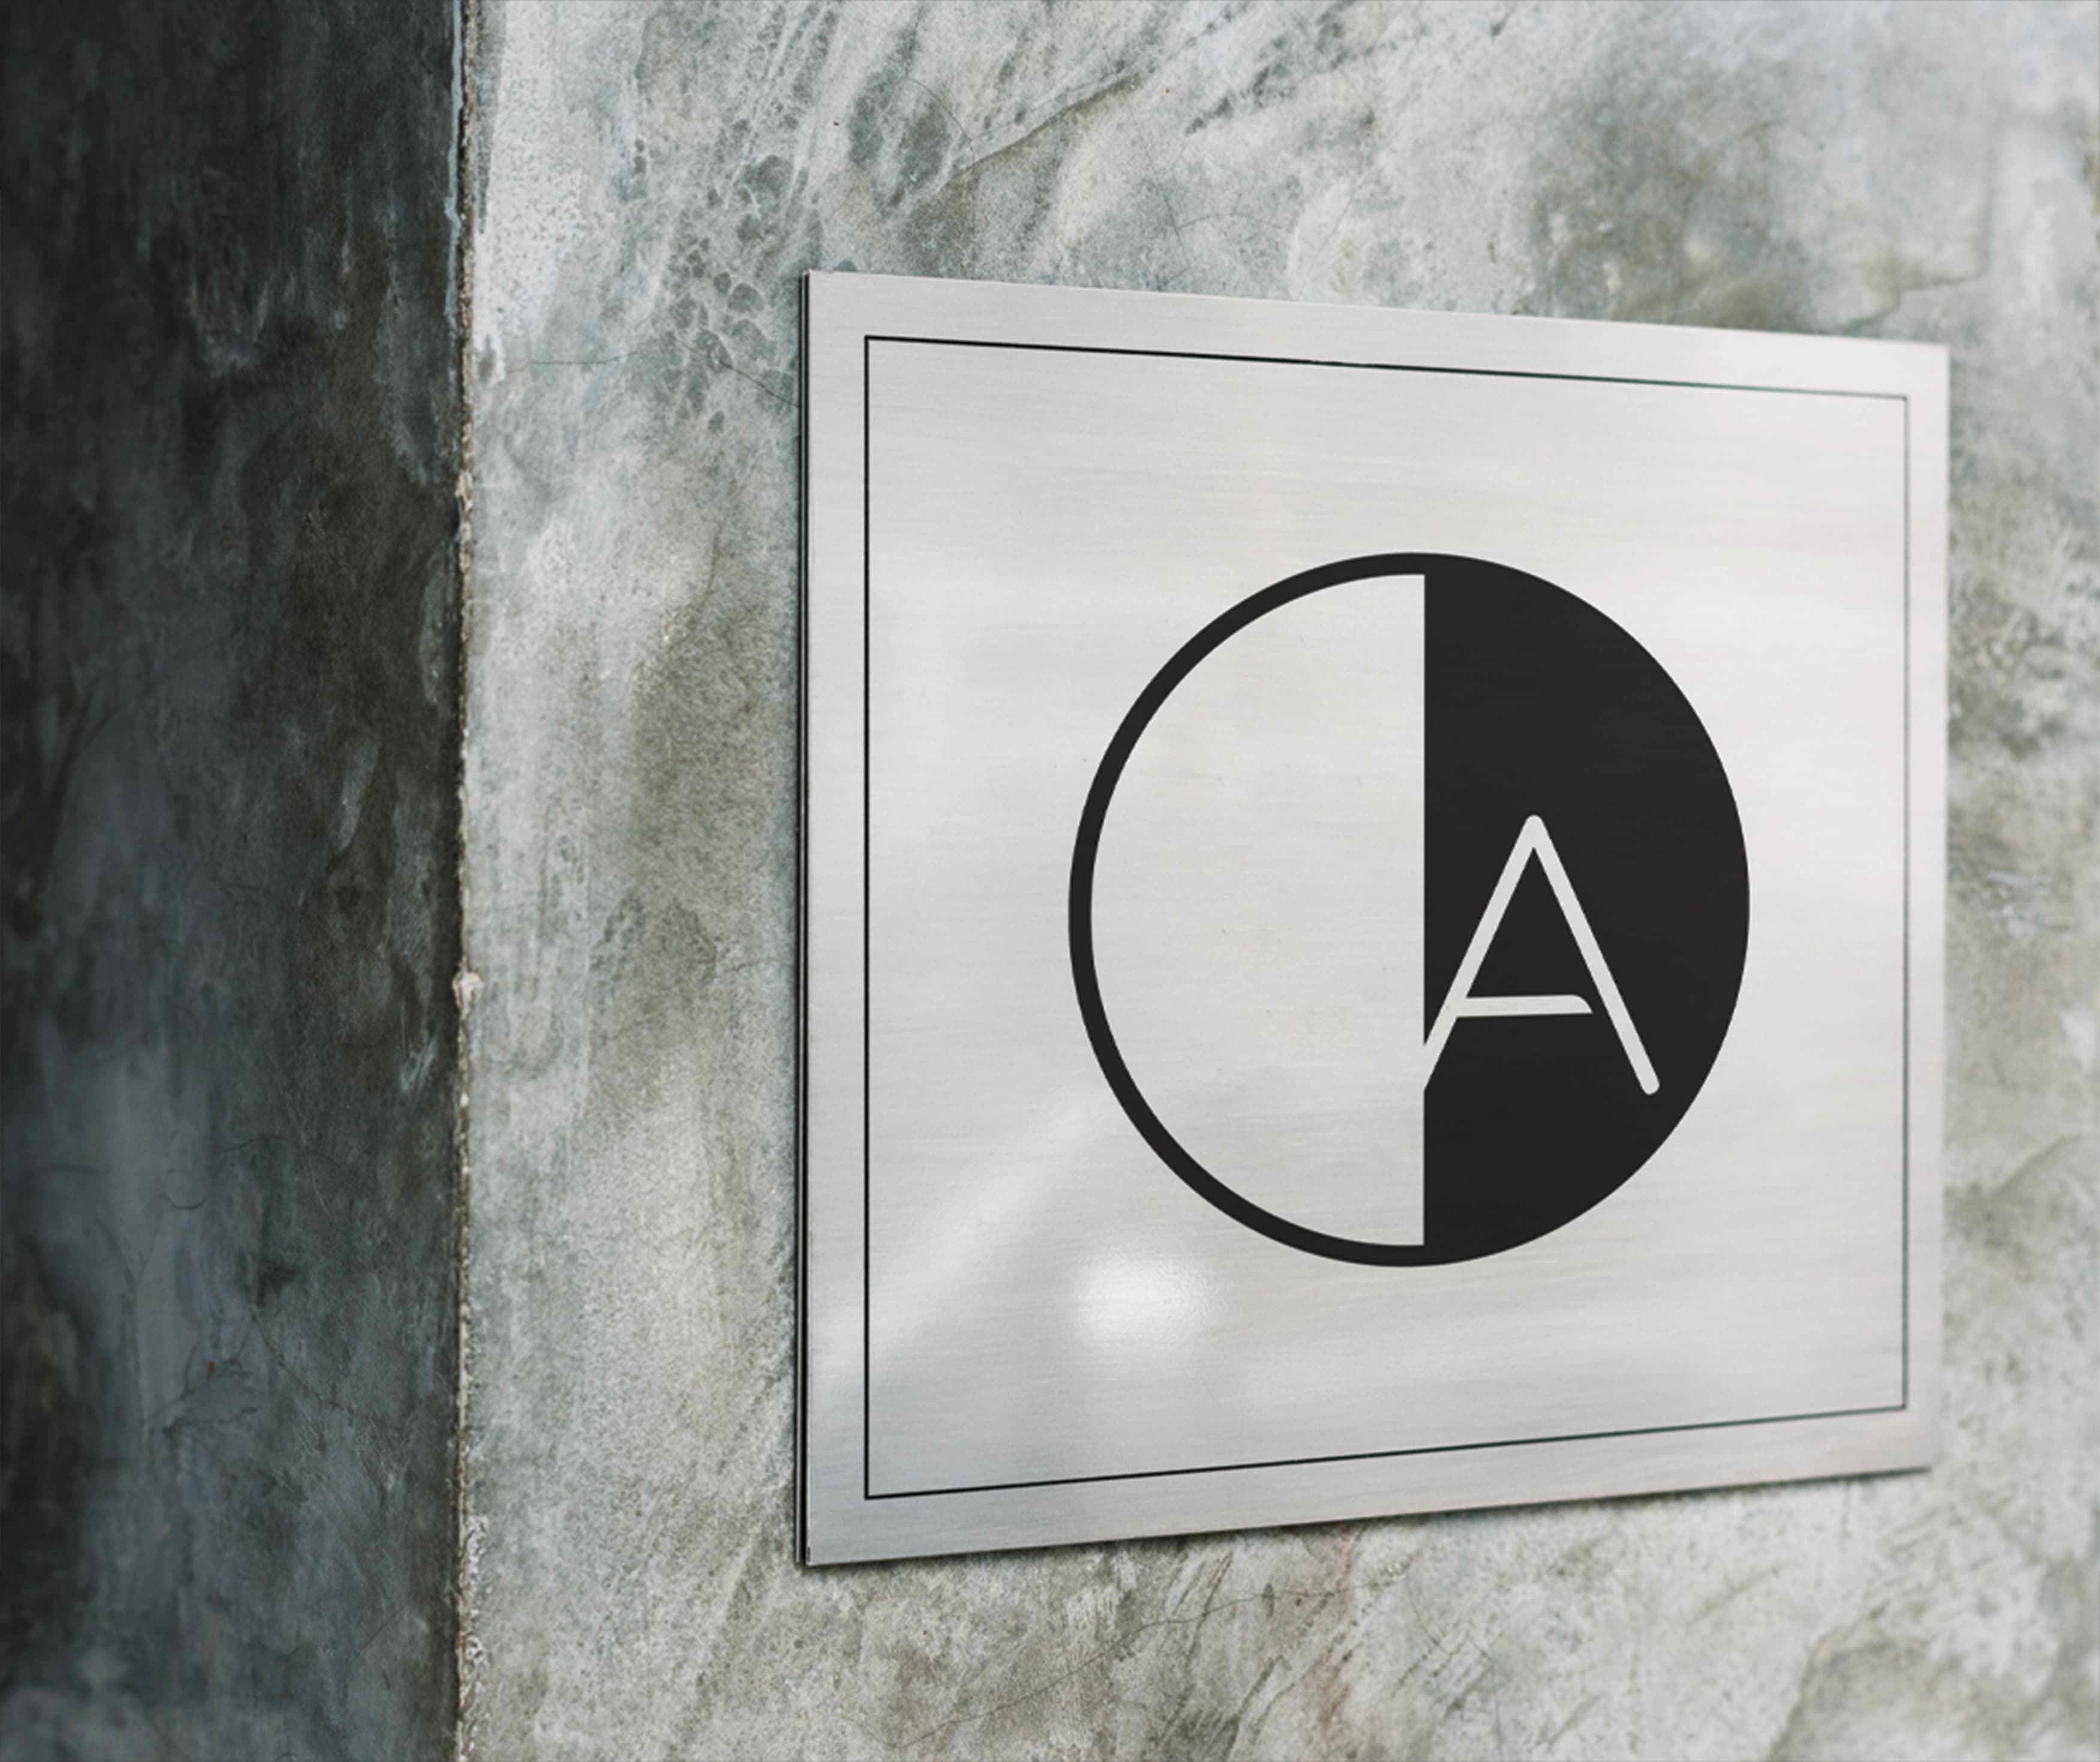 American Dream Retail Project Design in East Rutherford, New Jersey. Branded plaque sign identity.